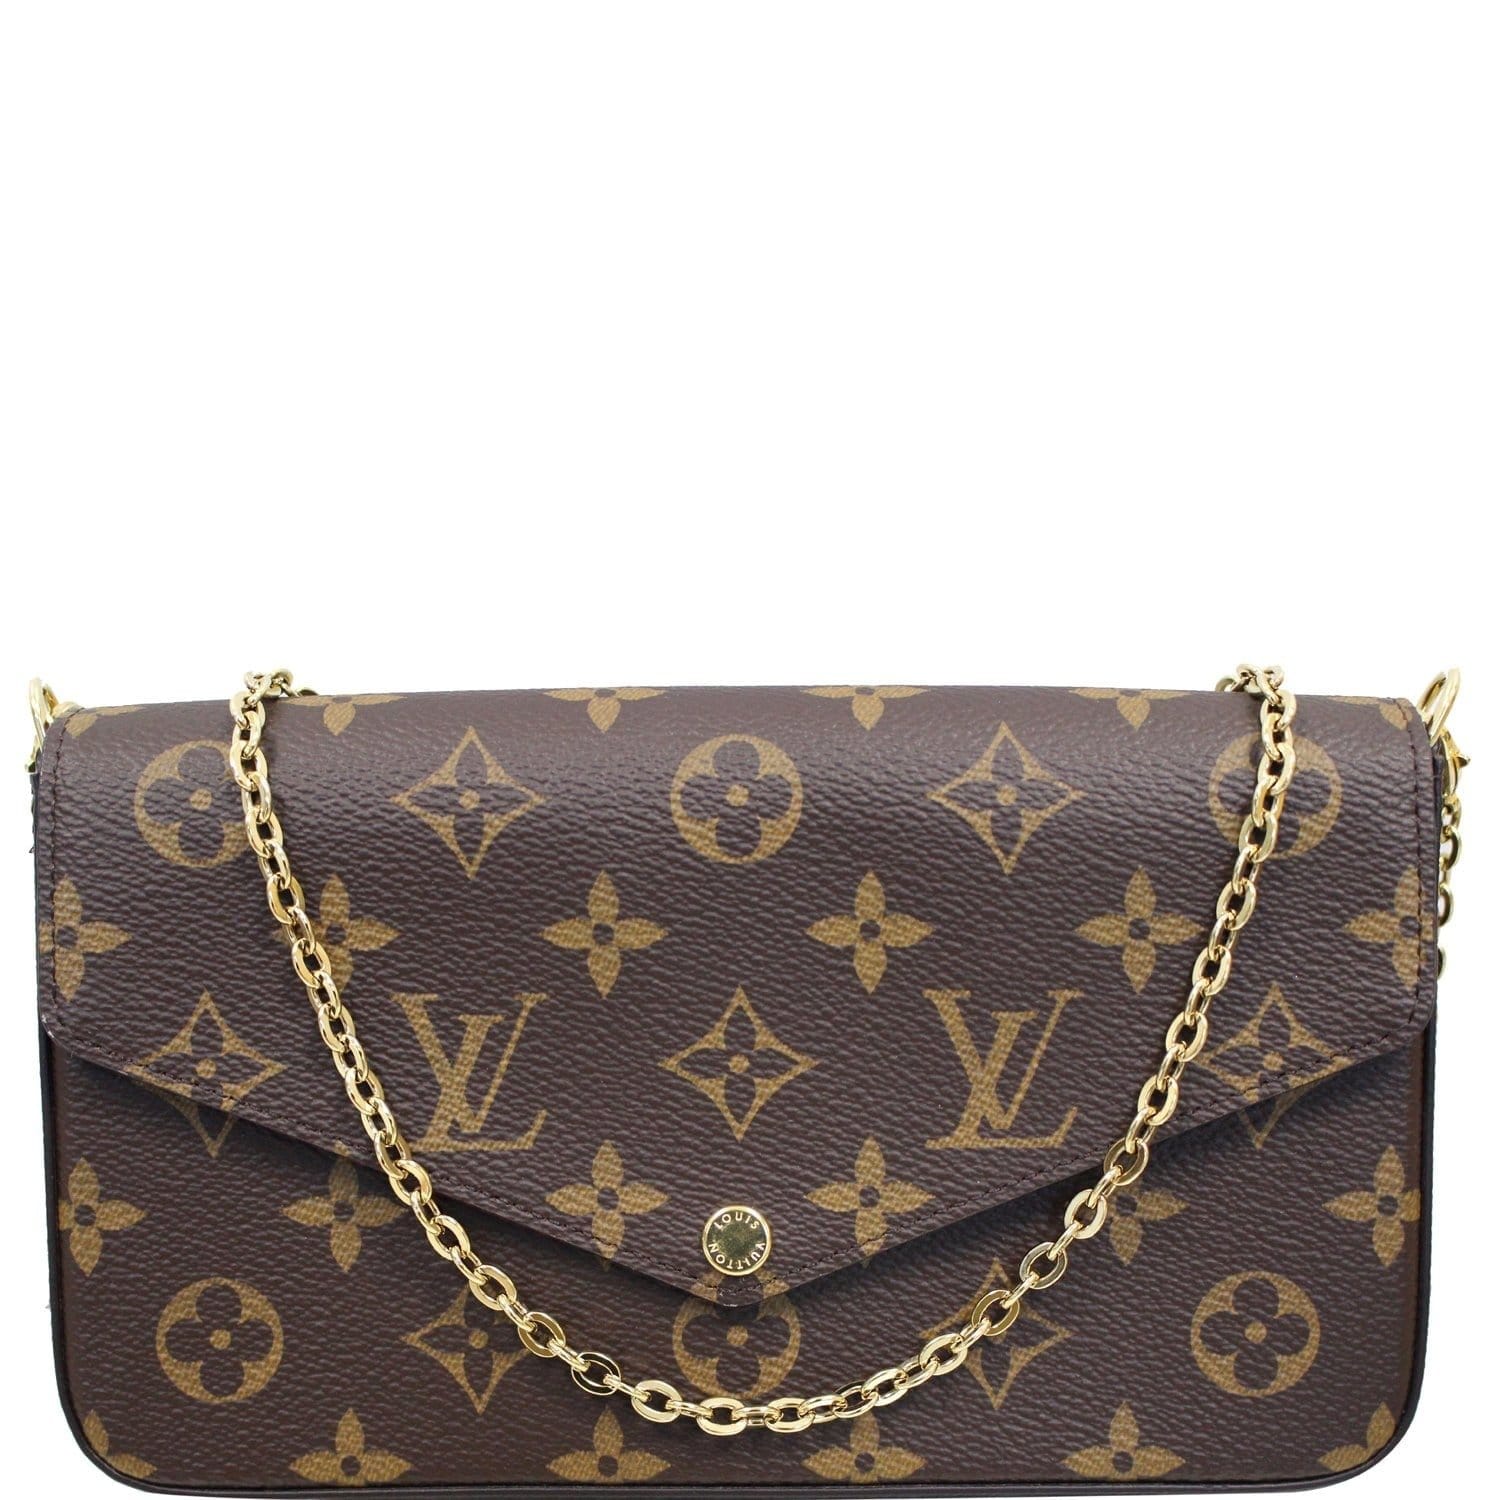 mybagtiful - 🛍Louis Vuitton Felicia 3 in 1 💰PM for more